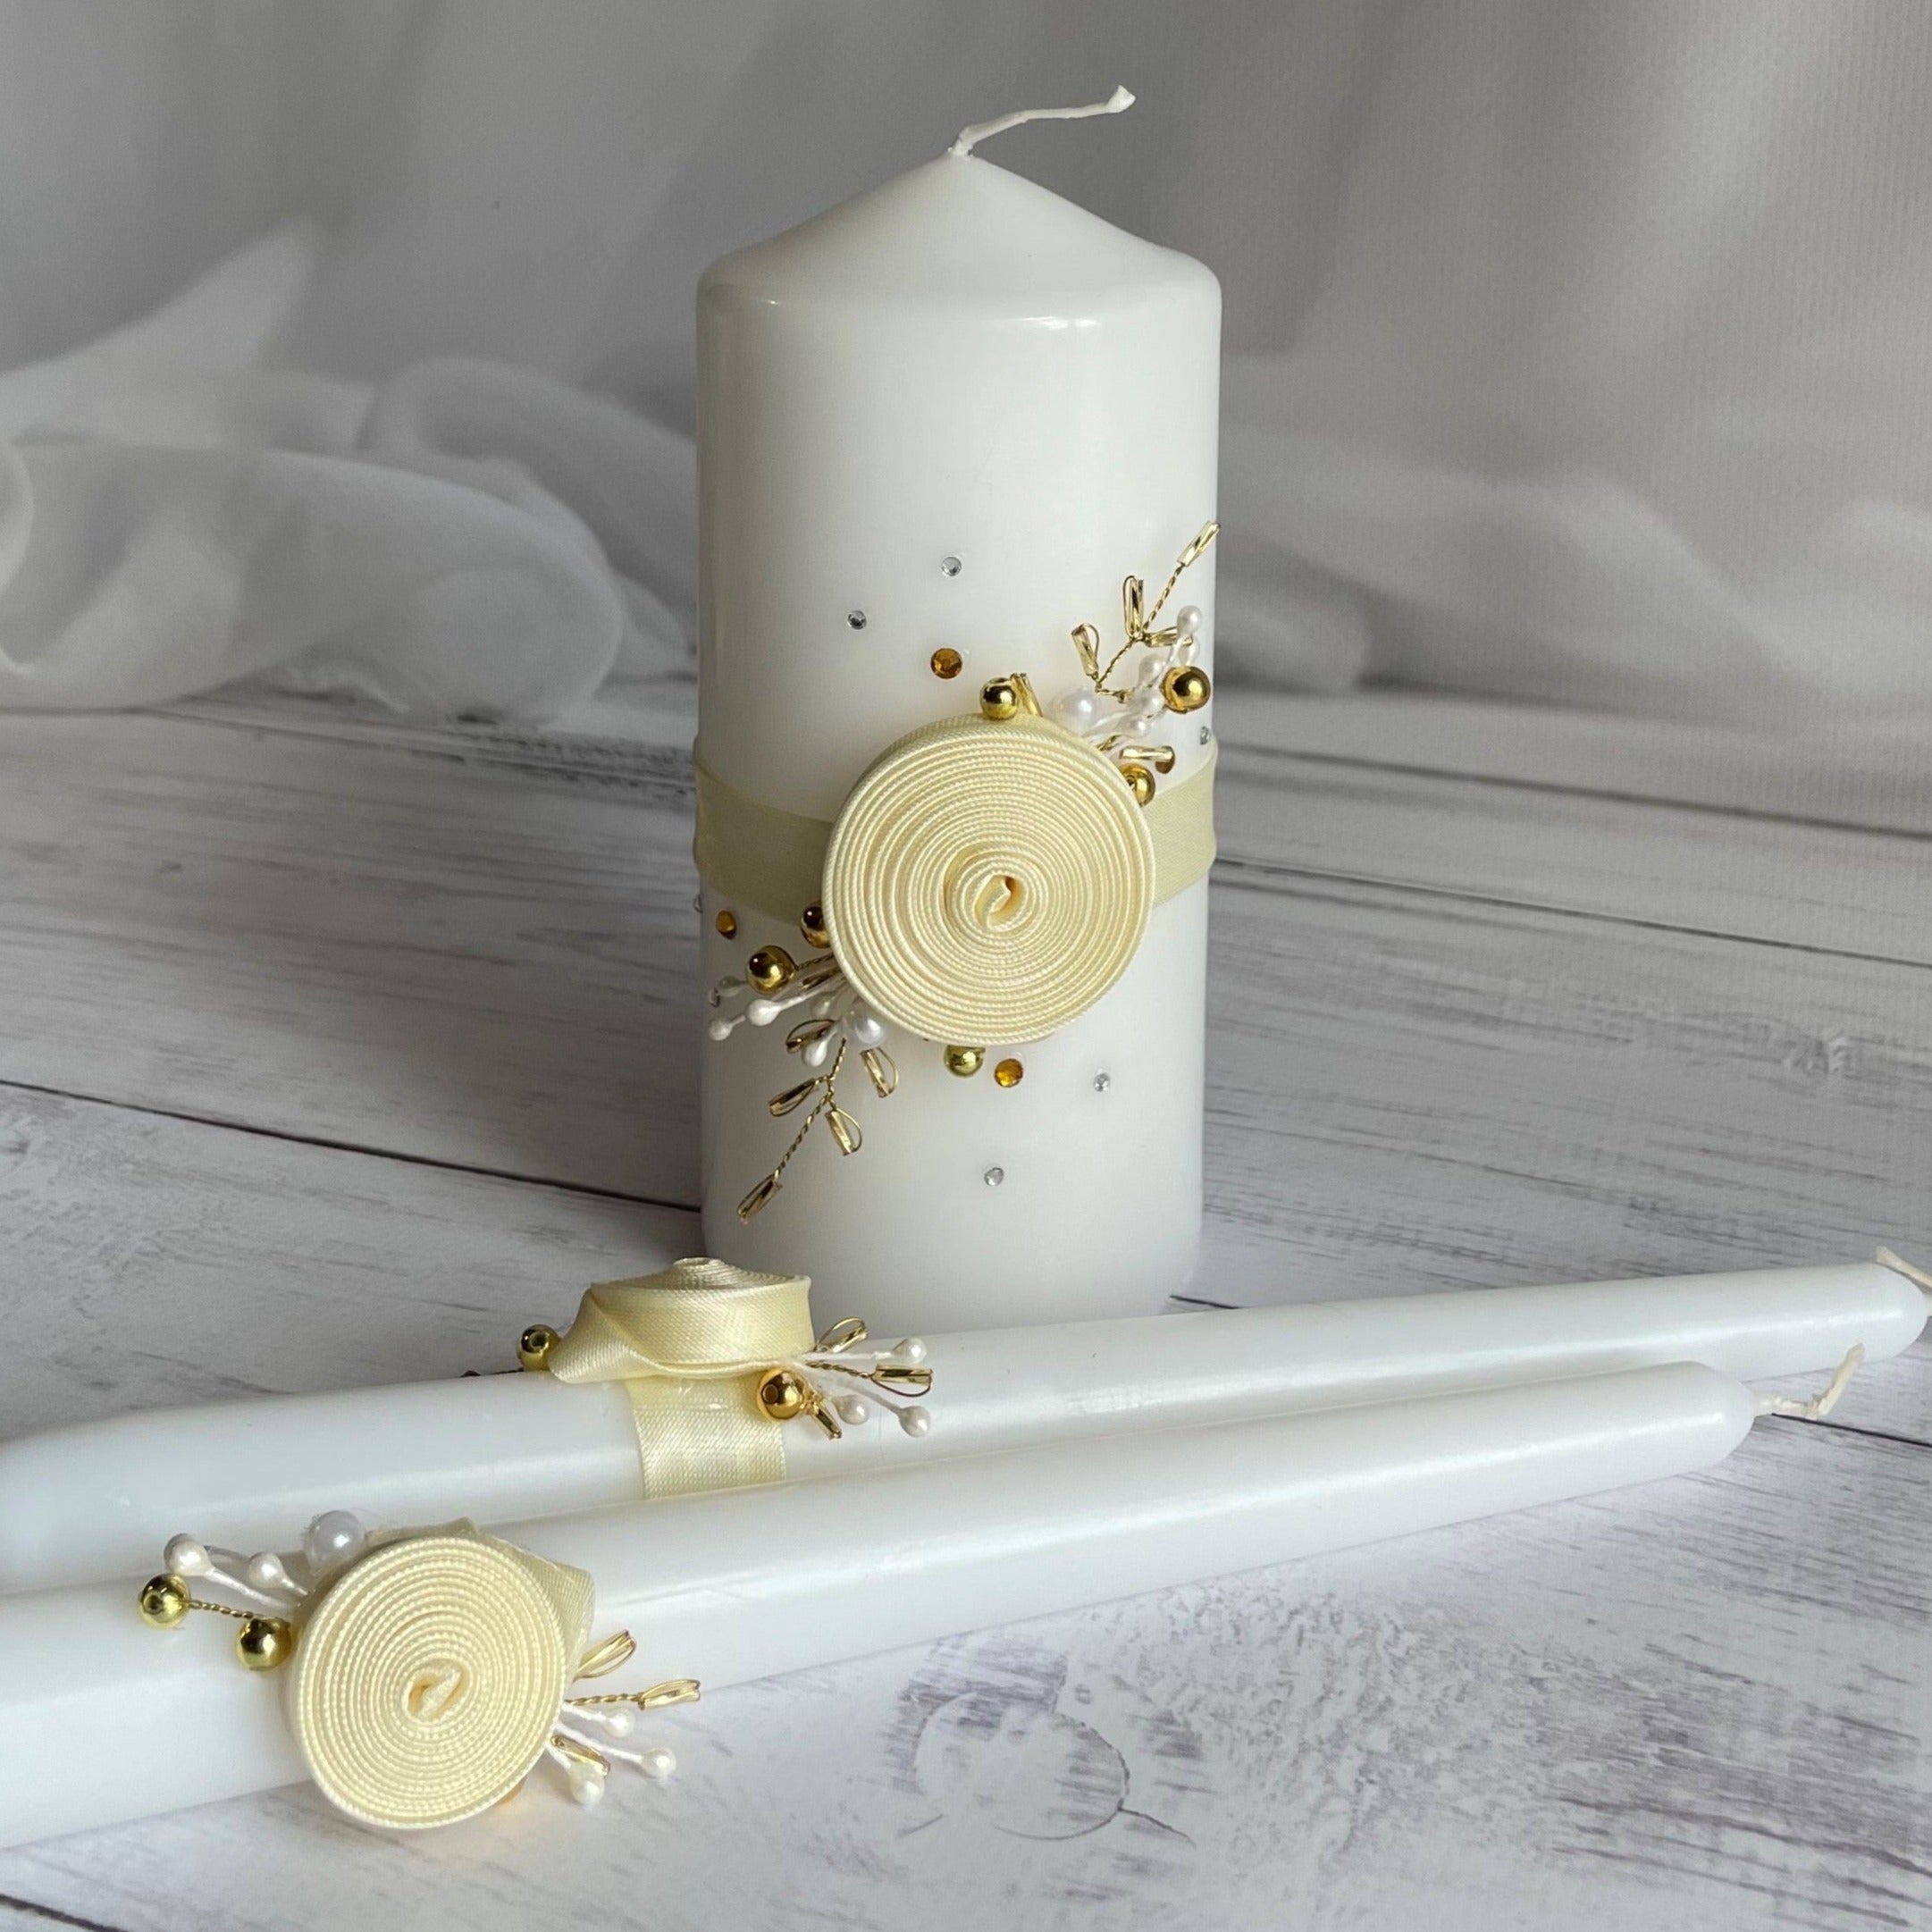 Magik Life Unity Candle Set for Wedding - Wedding Accessories for Reception and Ceremony - Candle Sets – Unity Candle 6 Inch Pillar and 2*10 Inch Tapers- Bachelorette and Engagement Party